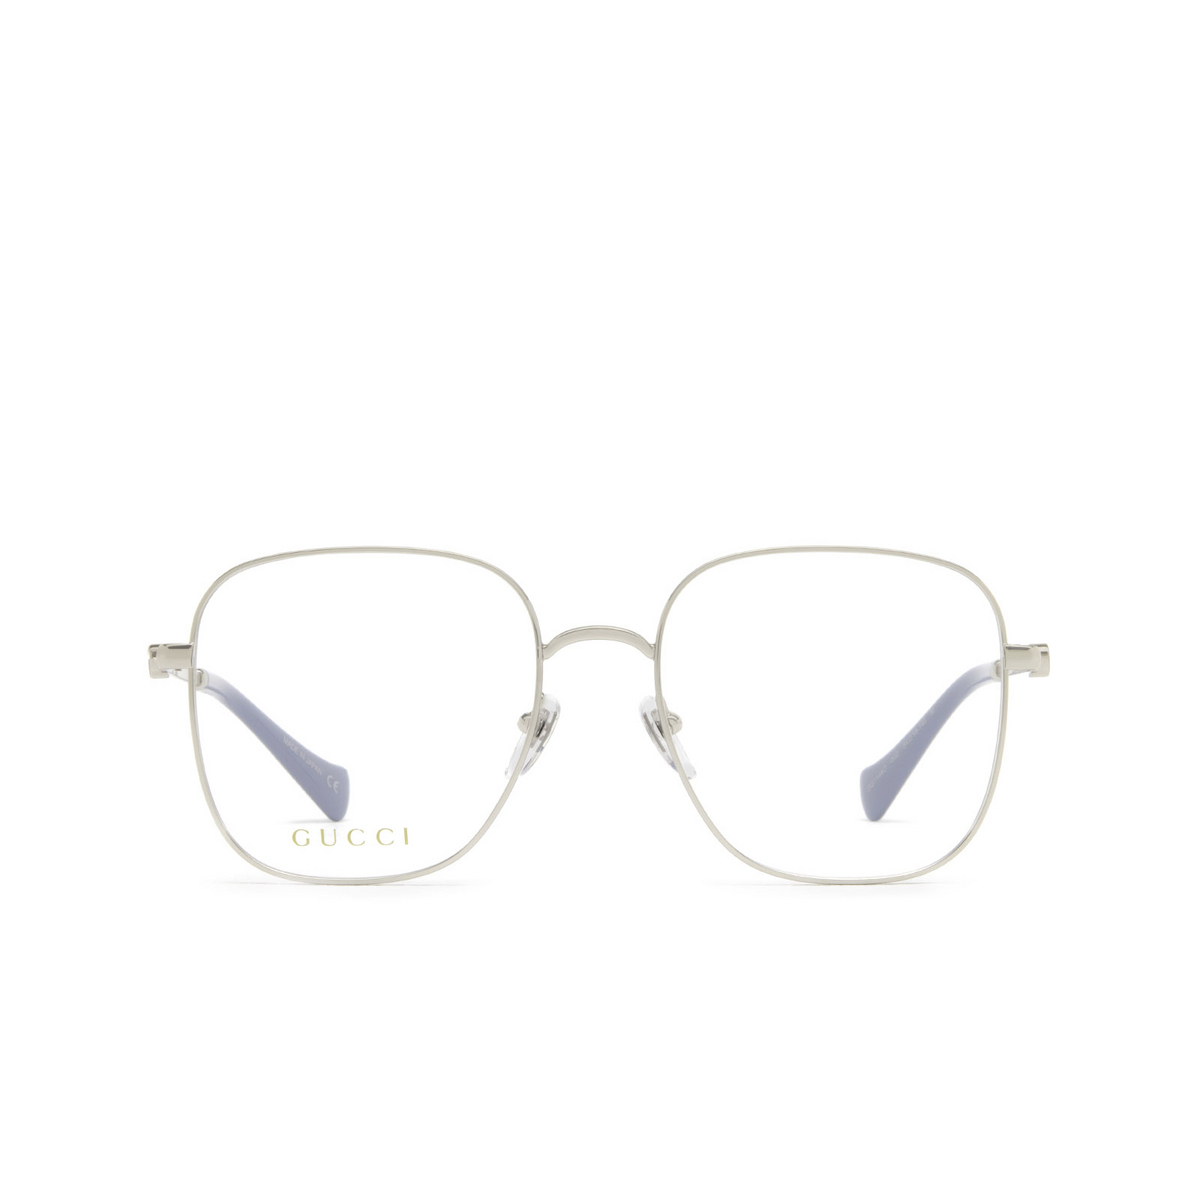 Gucci® Square Eyeglasses: GG1144O color Silver 002 - front view.